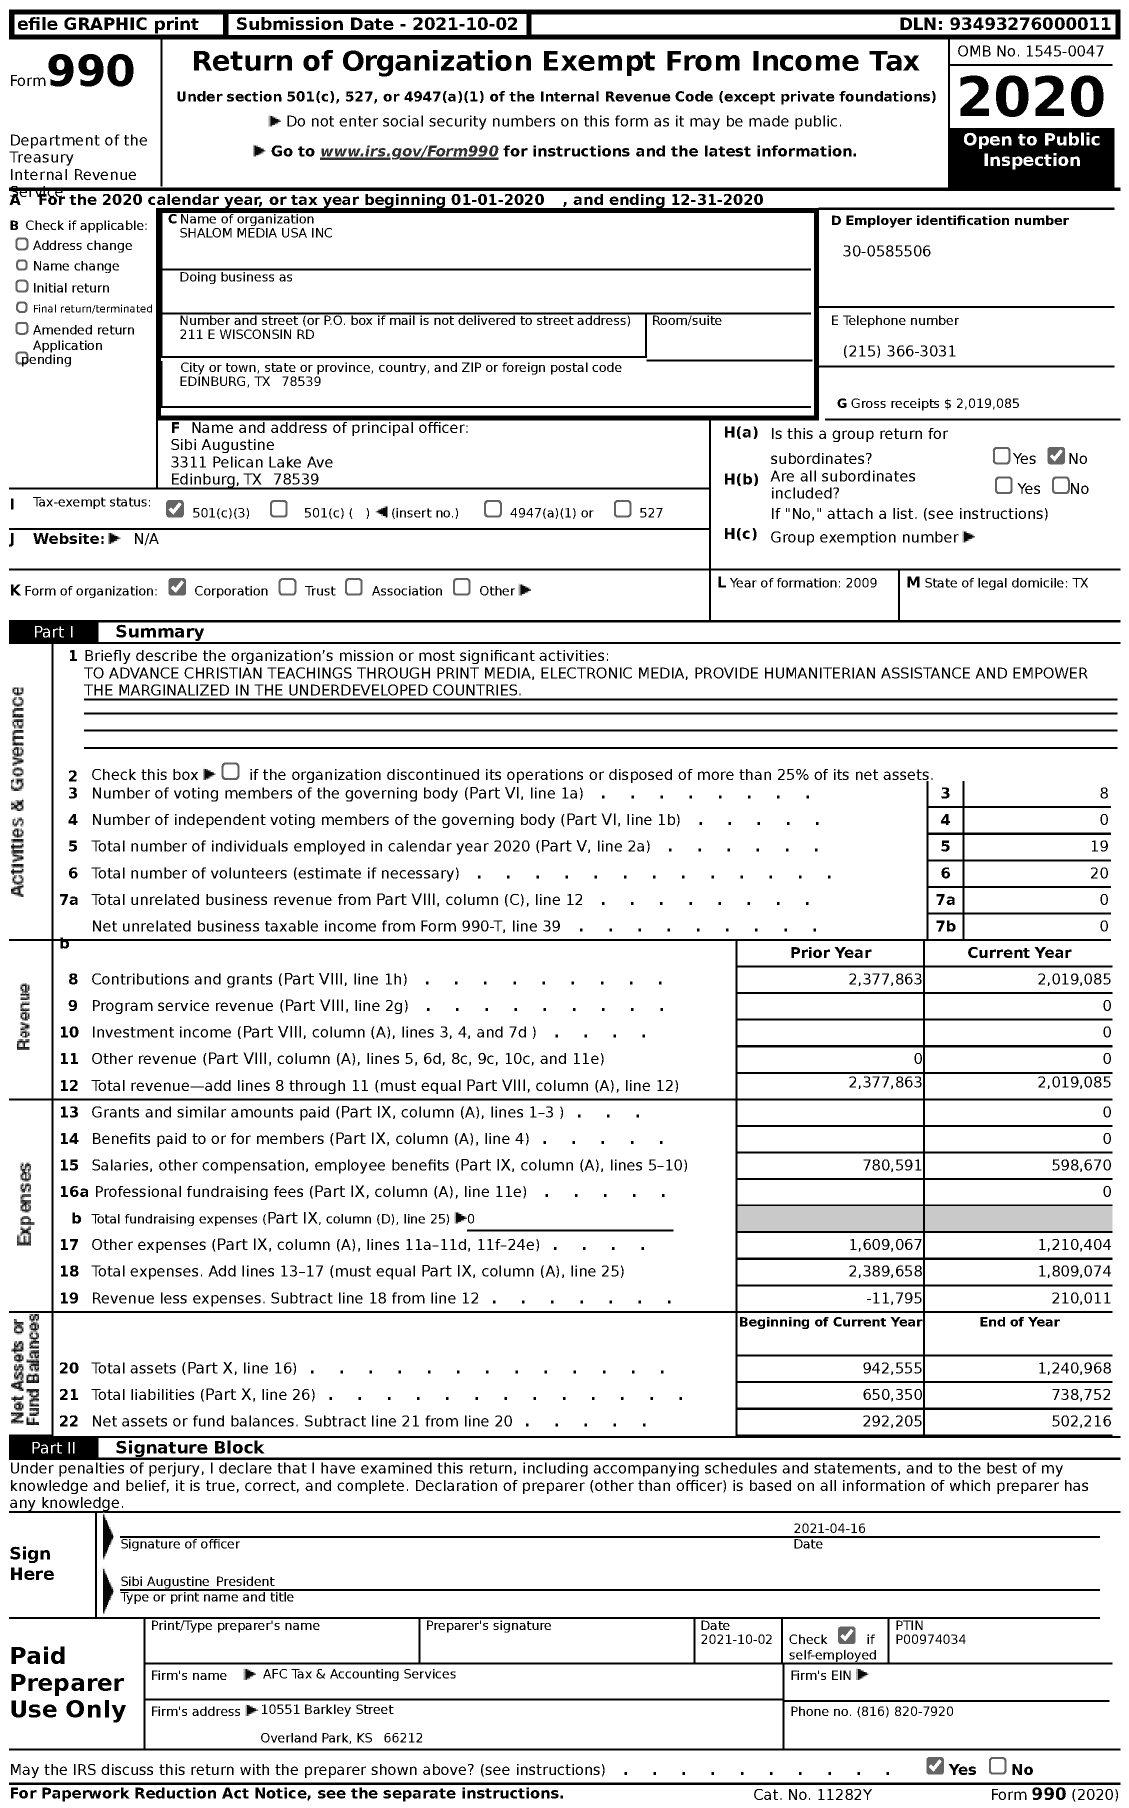 Image of first page of 2020 Form 990 for Shalom Media USA